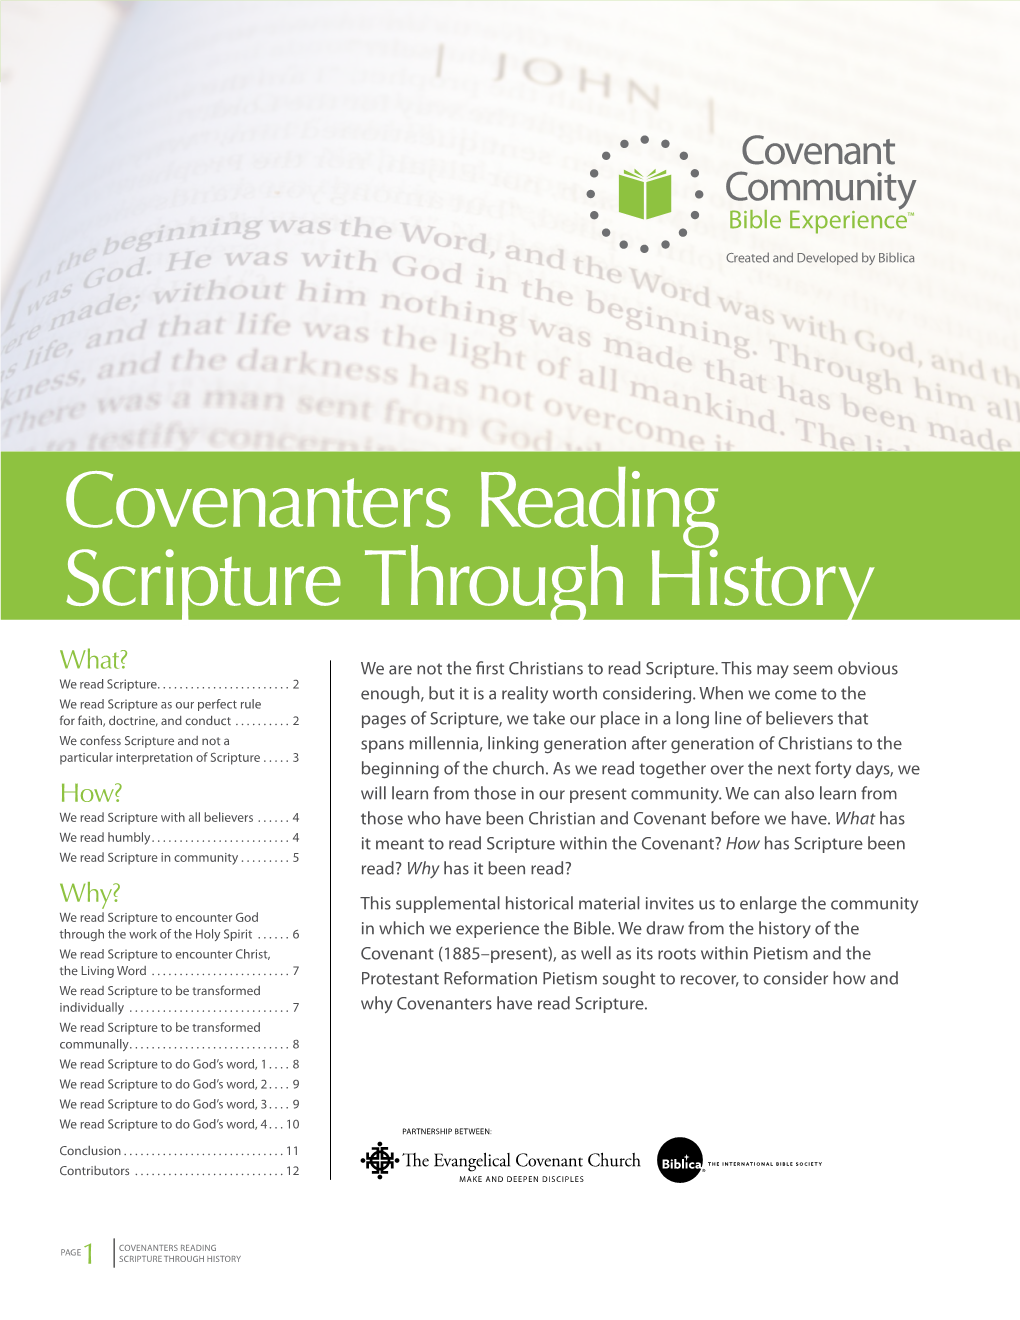 Covenanters Reading Scripture Through History